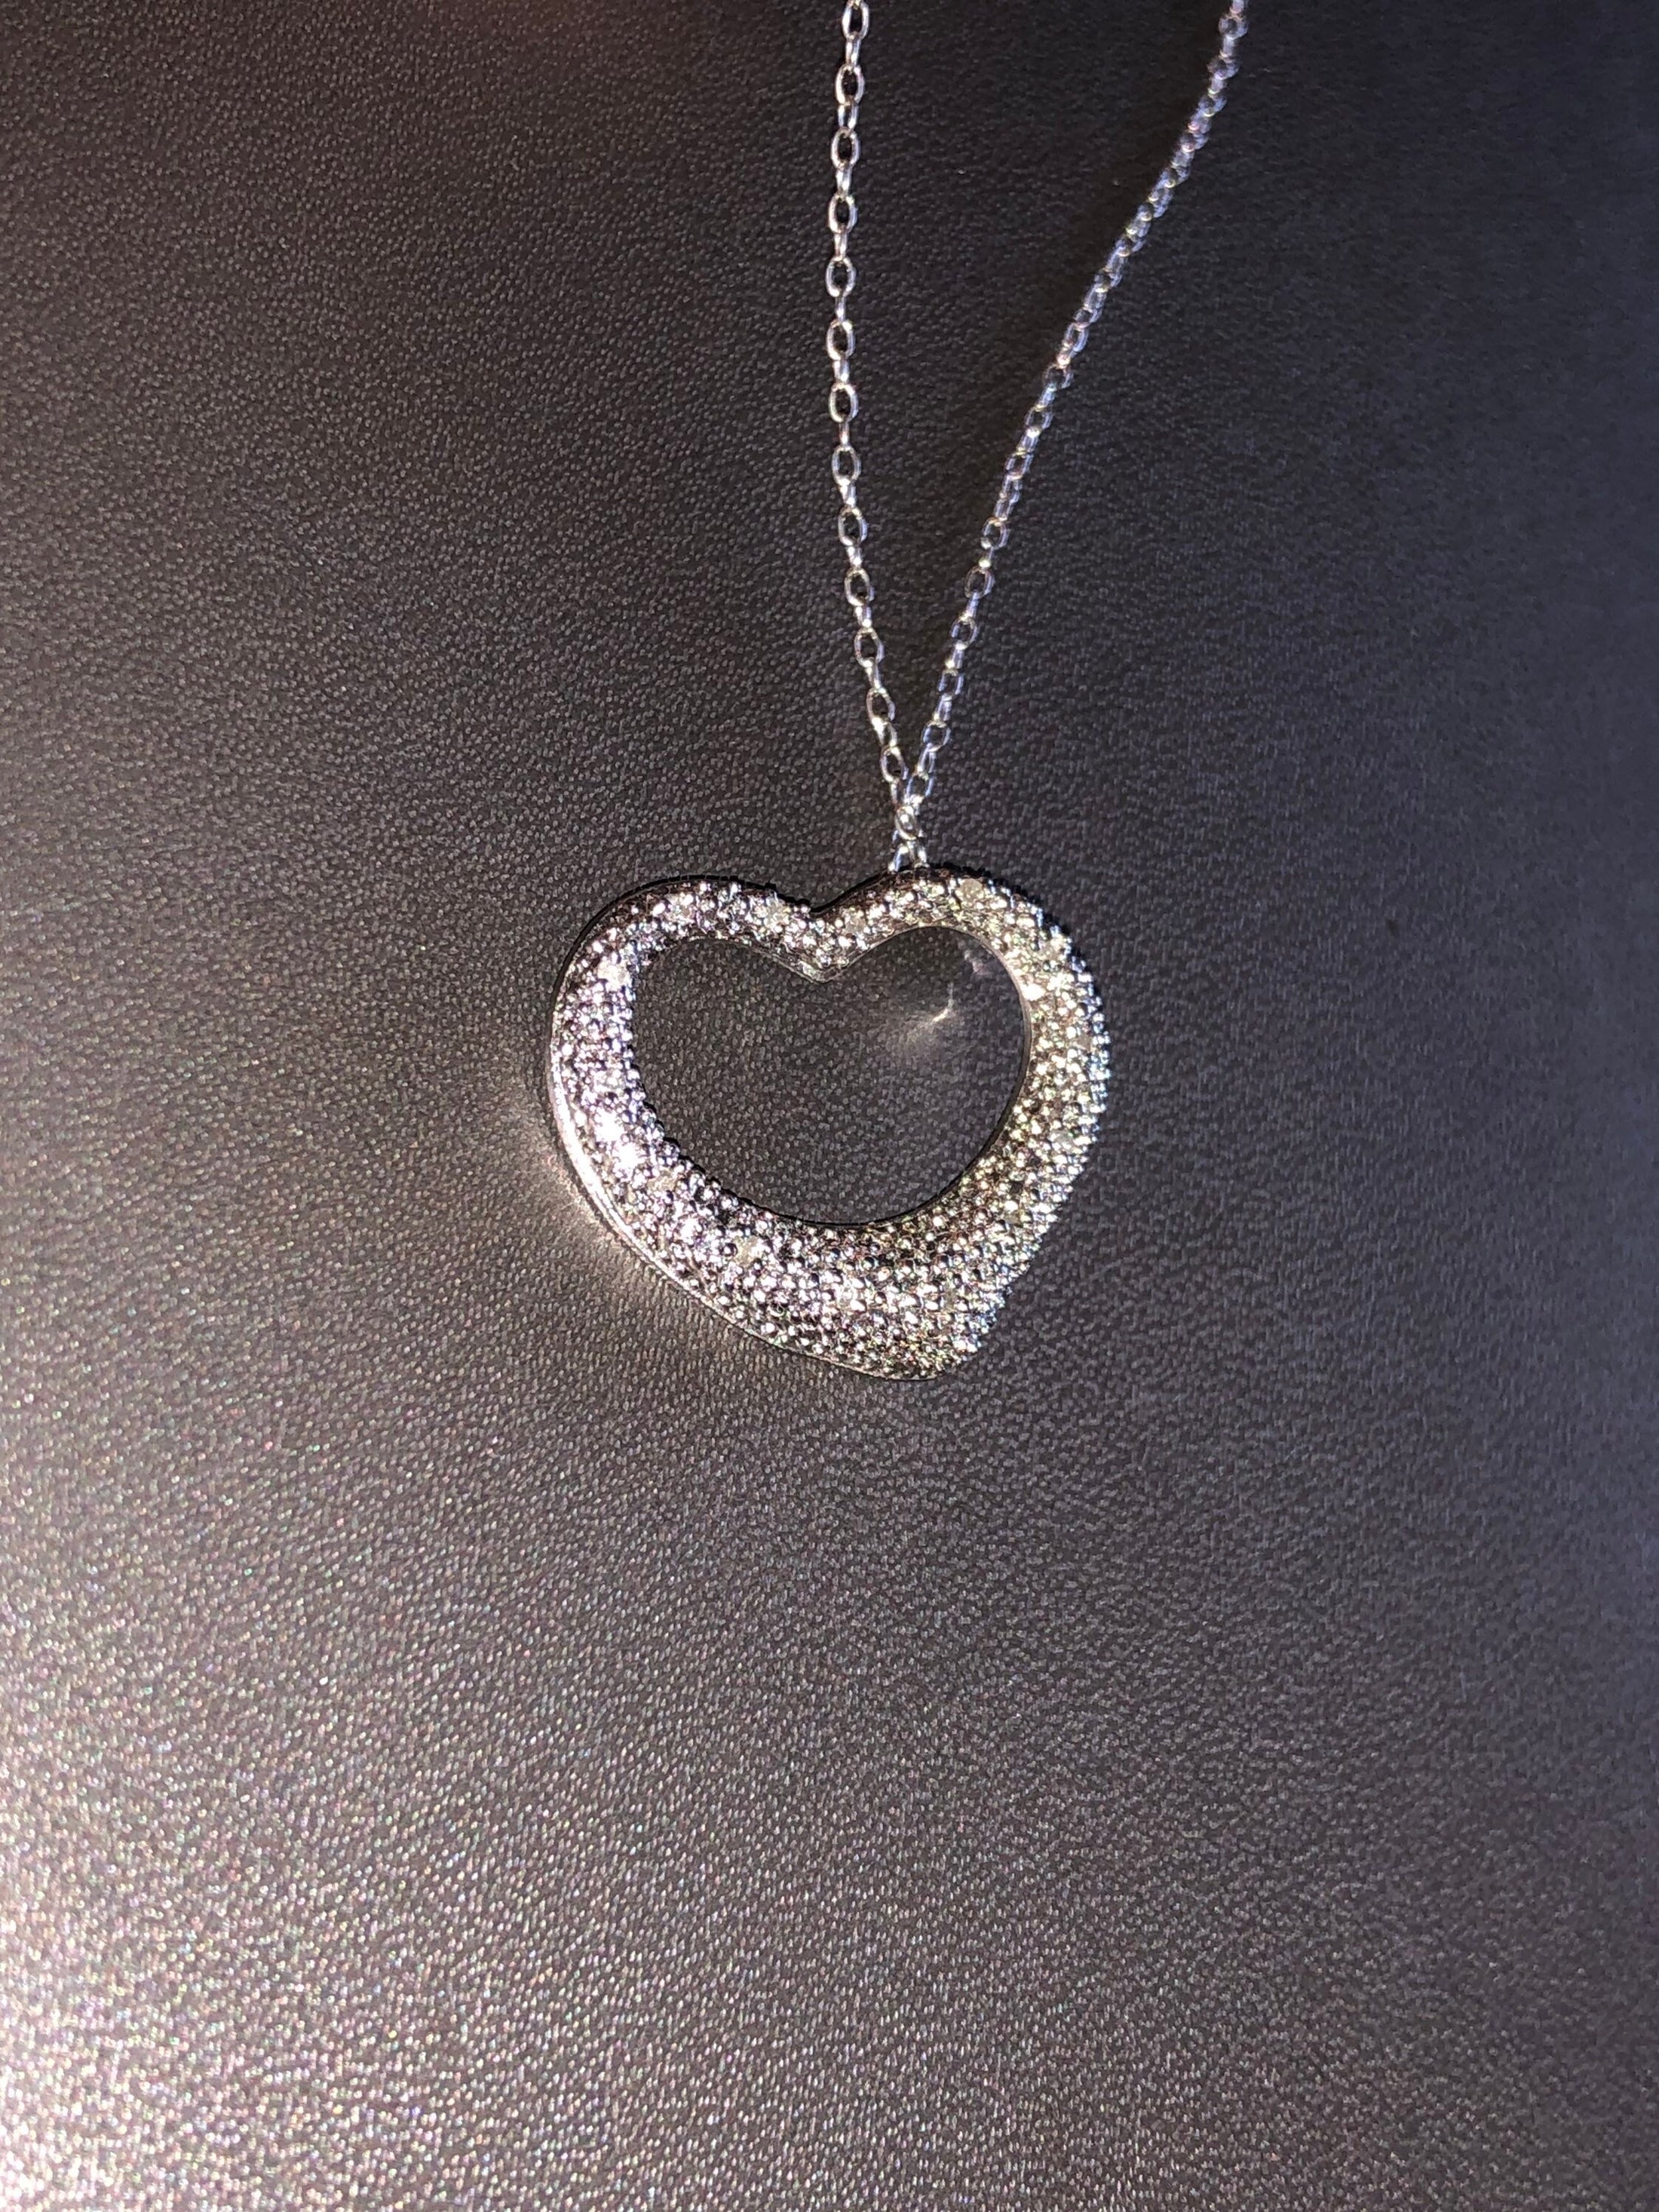 Beautiful real Diamond heart pendant w/ chain best Christmas occasions comes w/ gift packaging ready to gift. holiday’s Day sale!